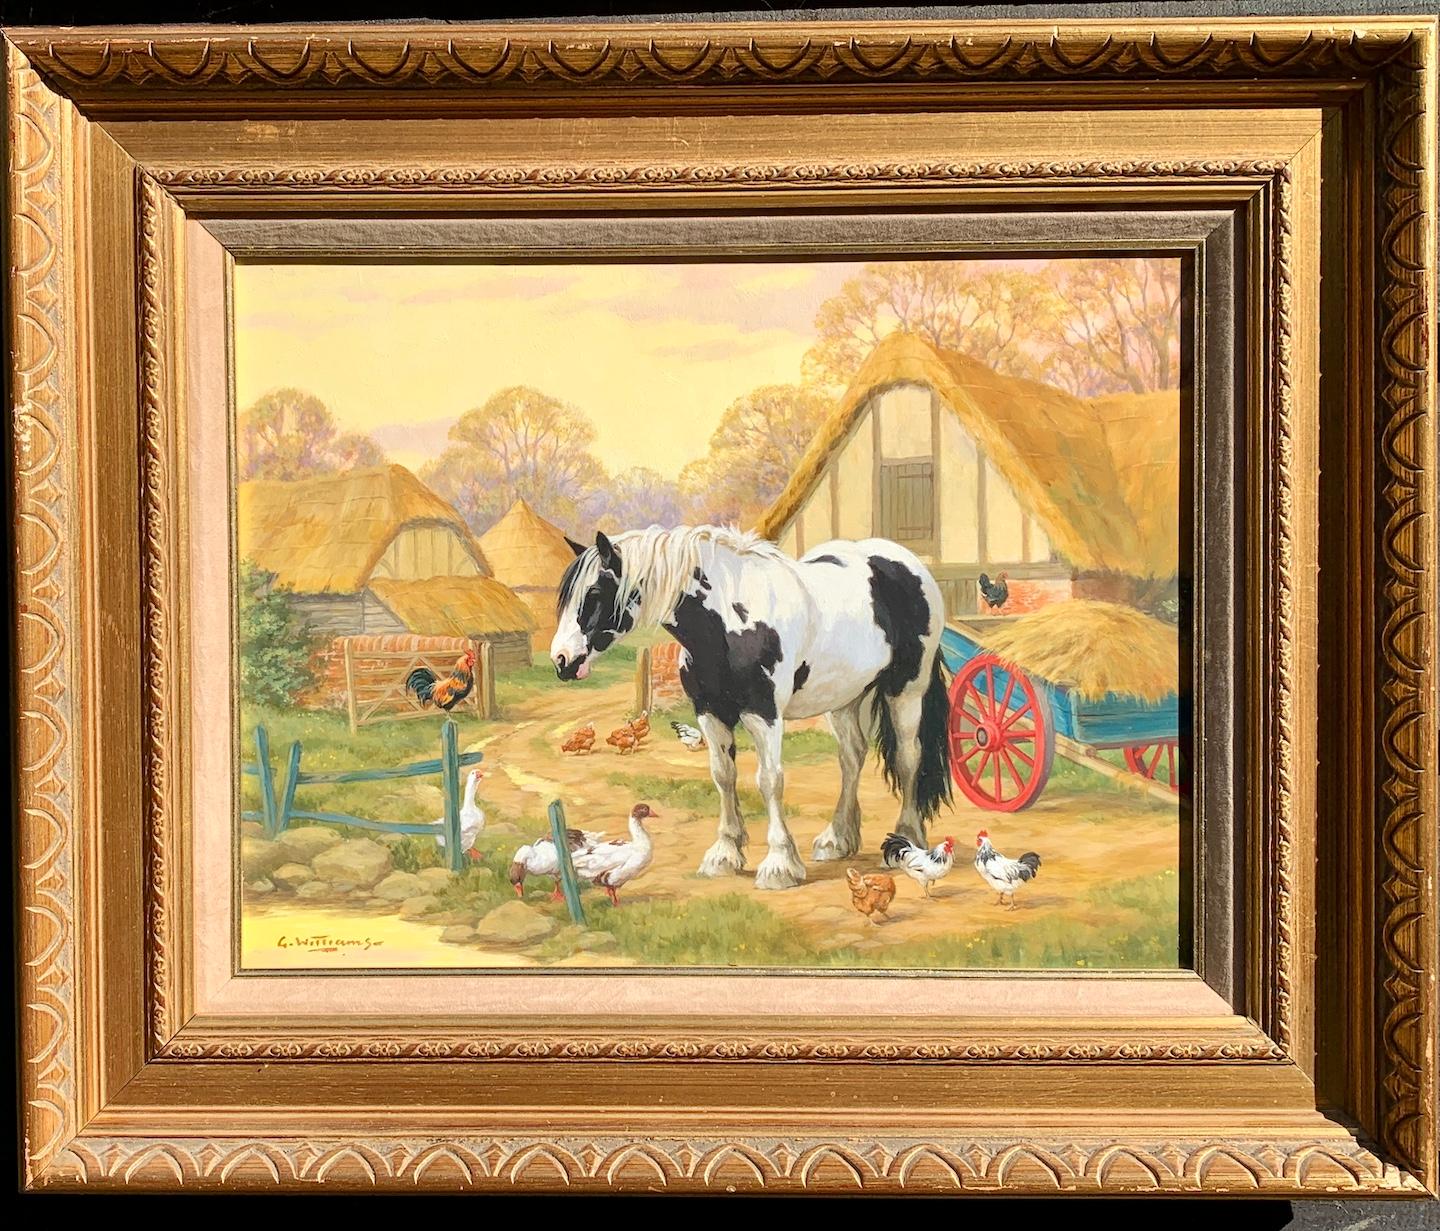 English Farm scene with a Shire horse, chickens, ducks and thatched cottage